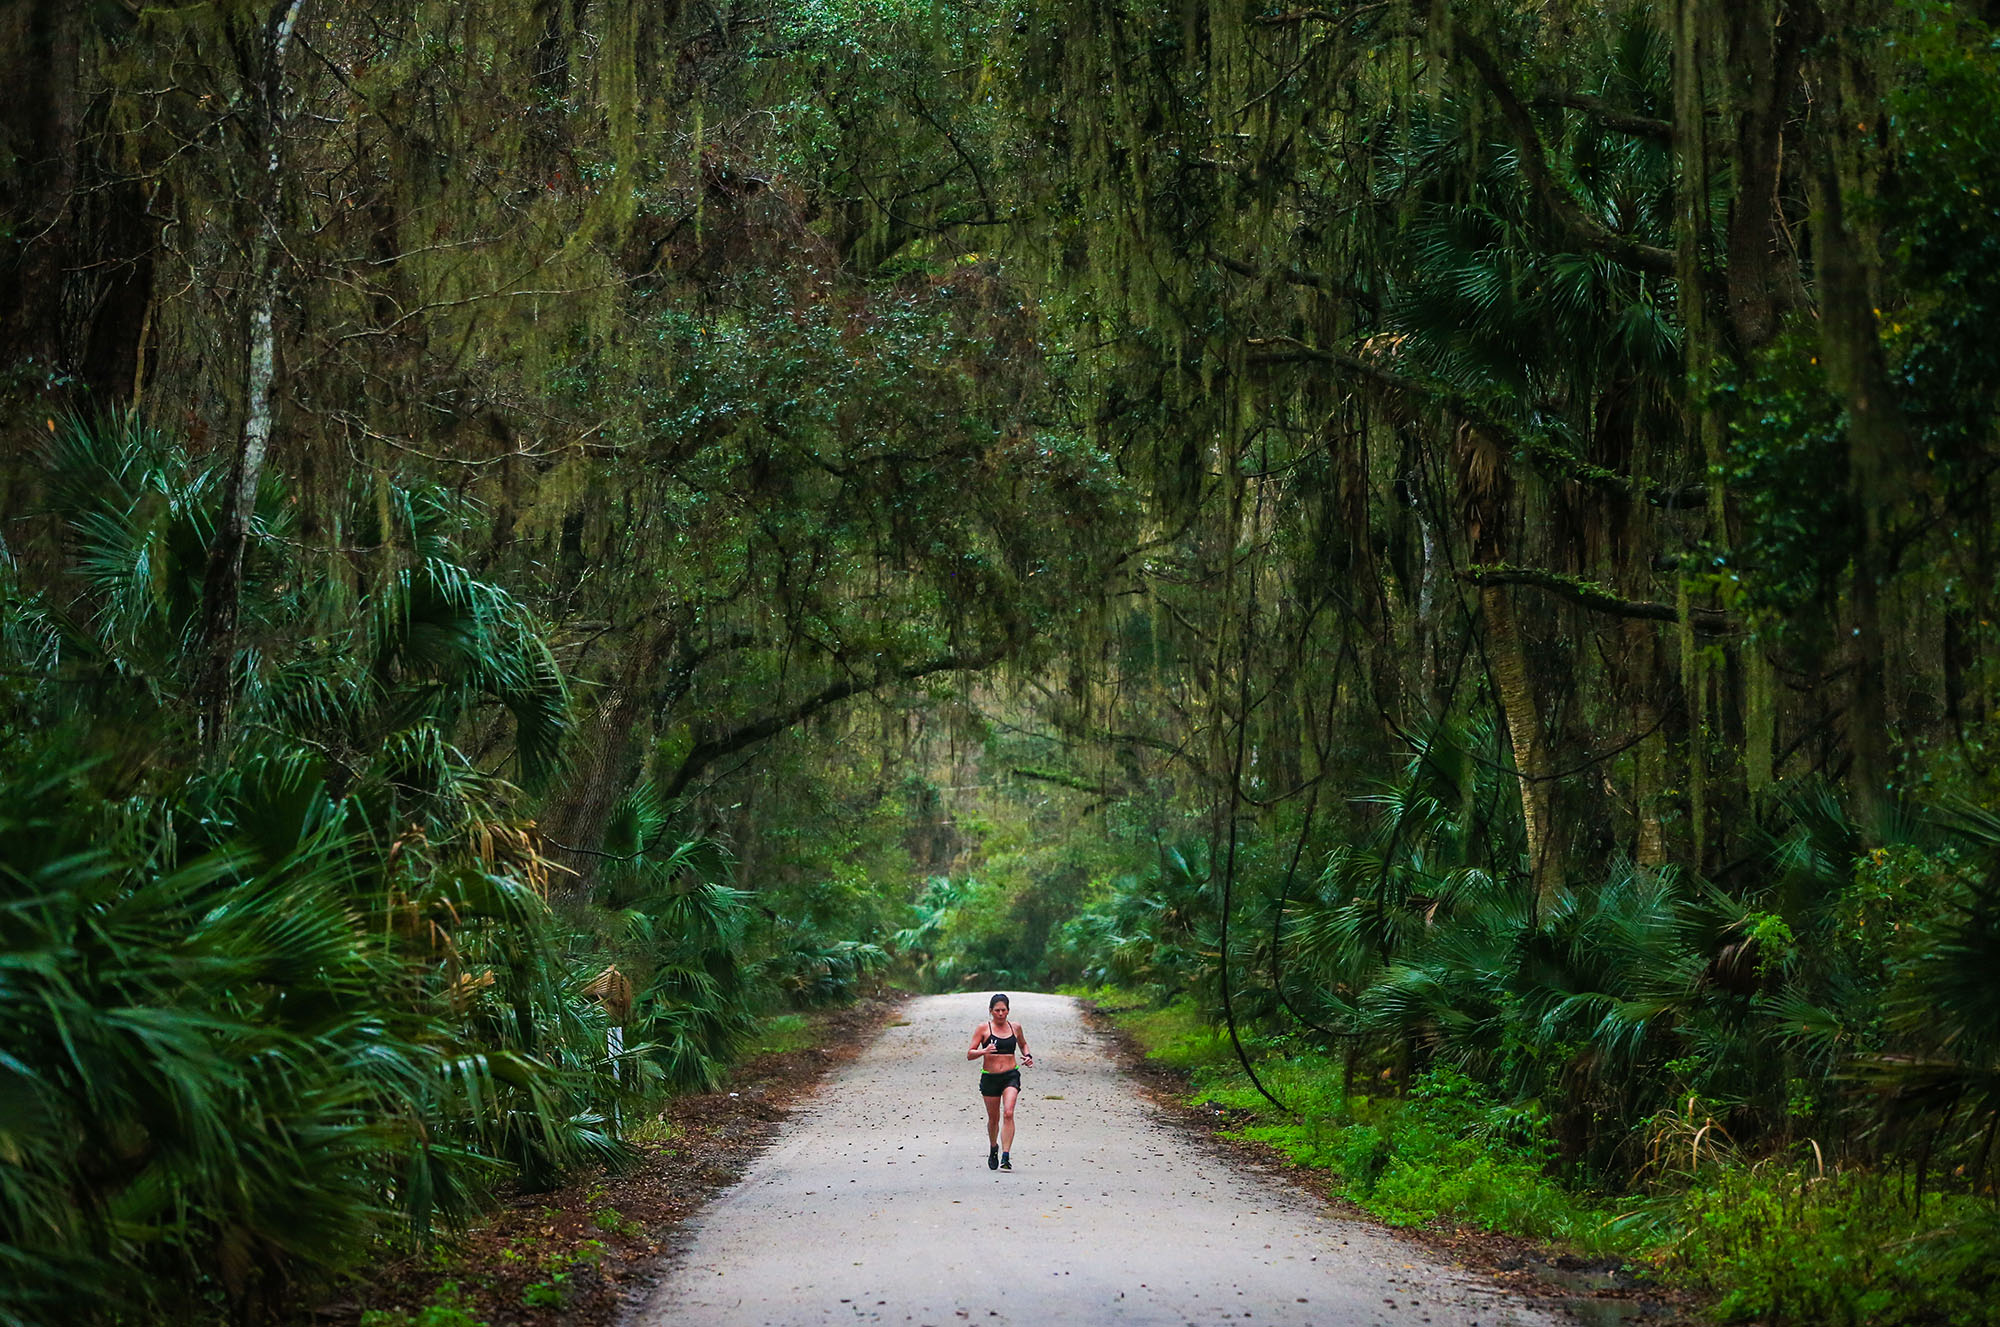 Runners take part in the Florida Track Club’s monthly race, The FTC Micanopy 5 & 10 mile race on Saturday, Feb. 13, 2021 in Micanopy, Fla. (Photo by Matt Stamey)